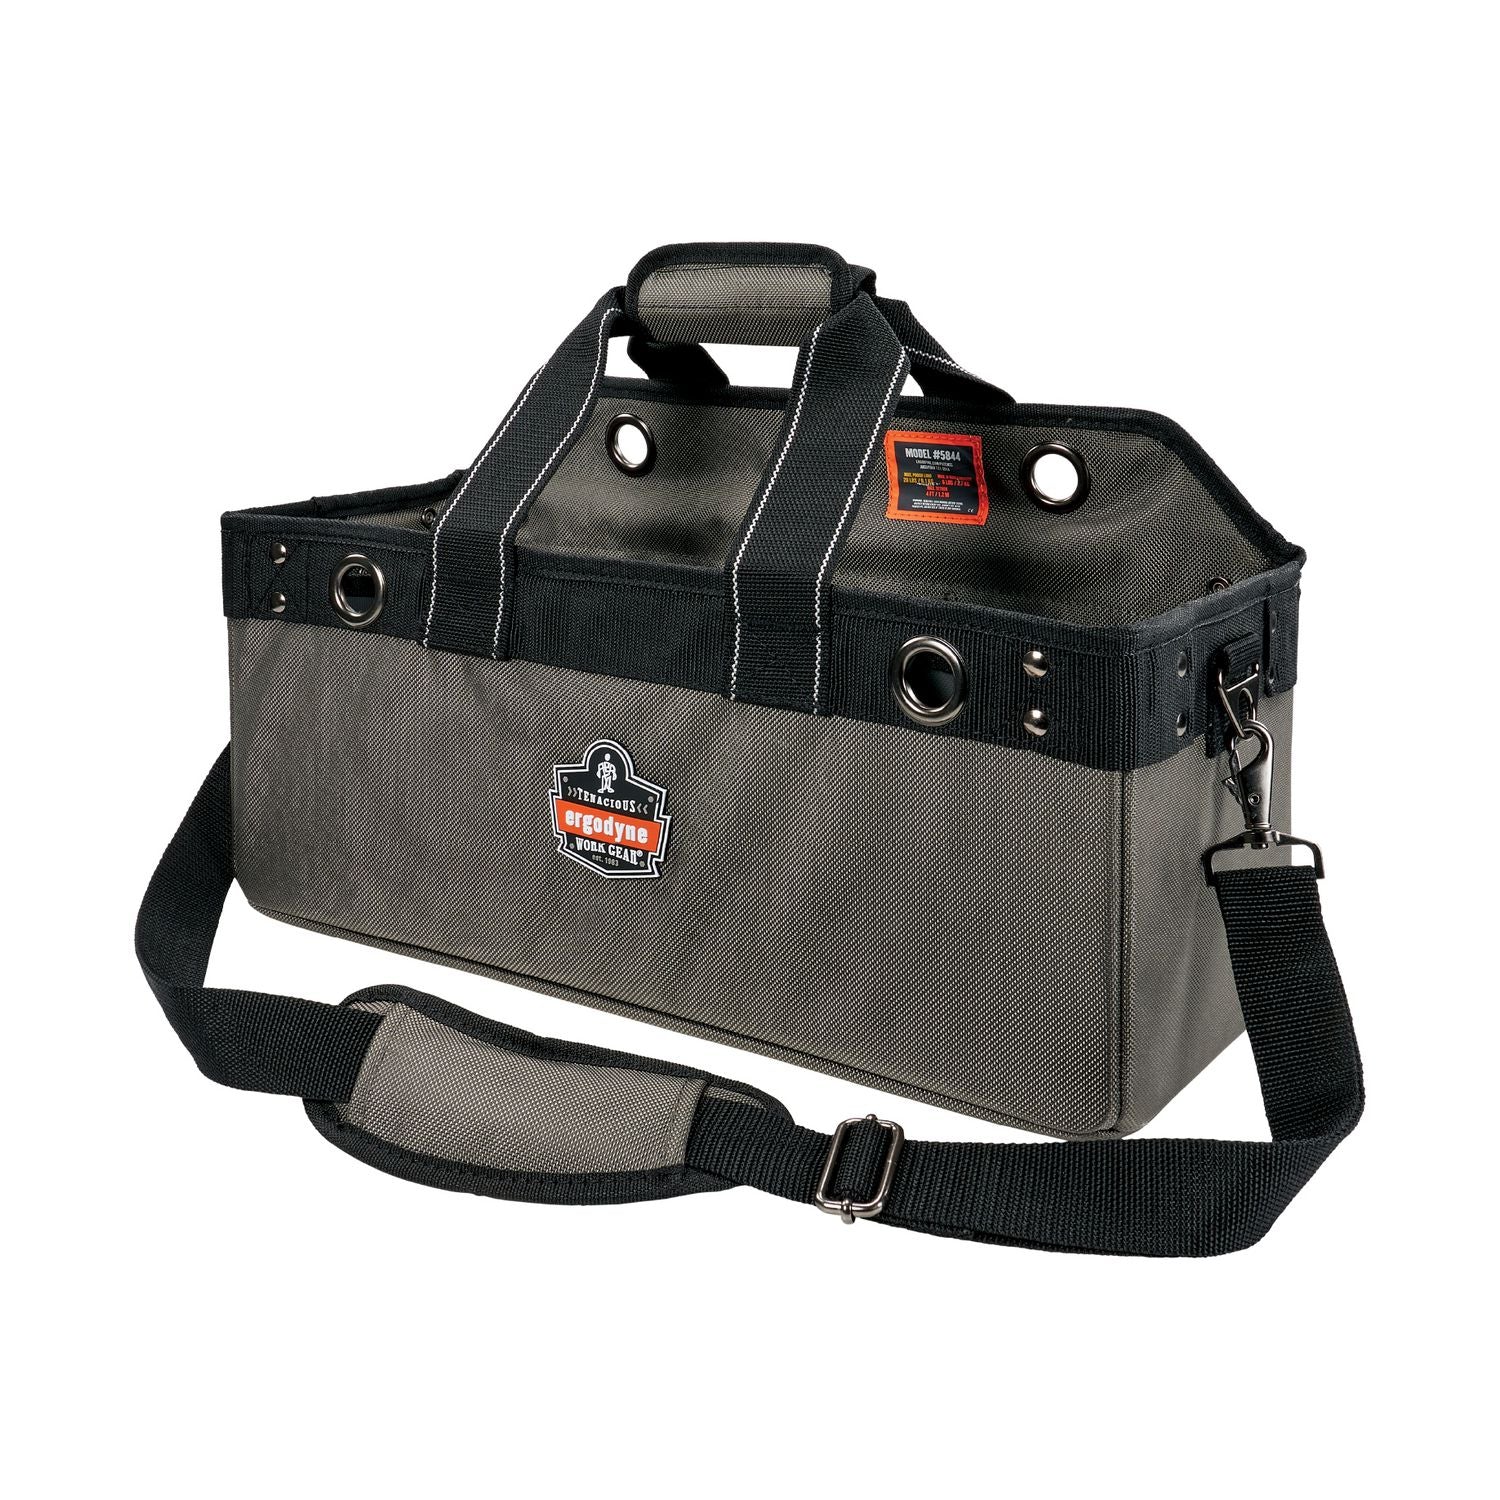 arsenal-5844-bucket-truck-tool-bag-w-tool-tethering-attachment-points-18-x-75-x-75-polyester-gray-ships-in-1-3-bus-days_ego13744 - 1